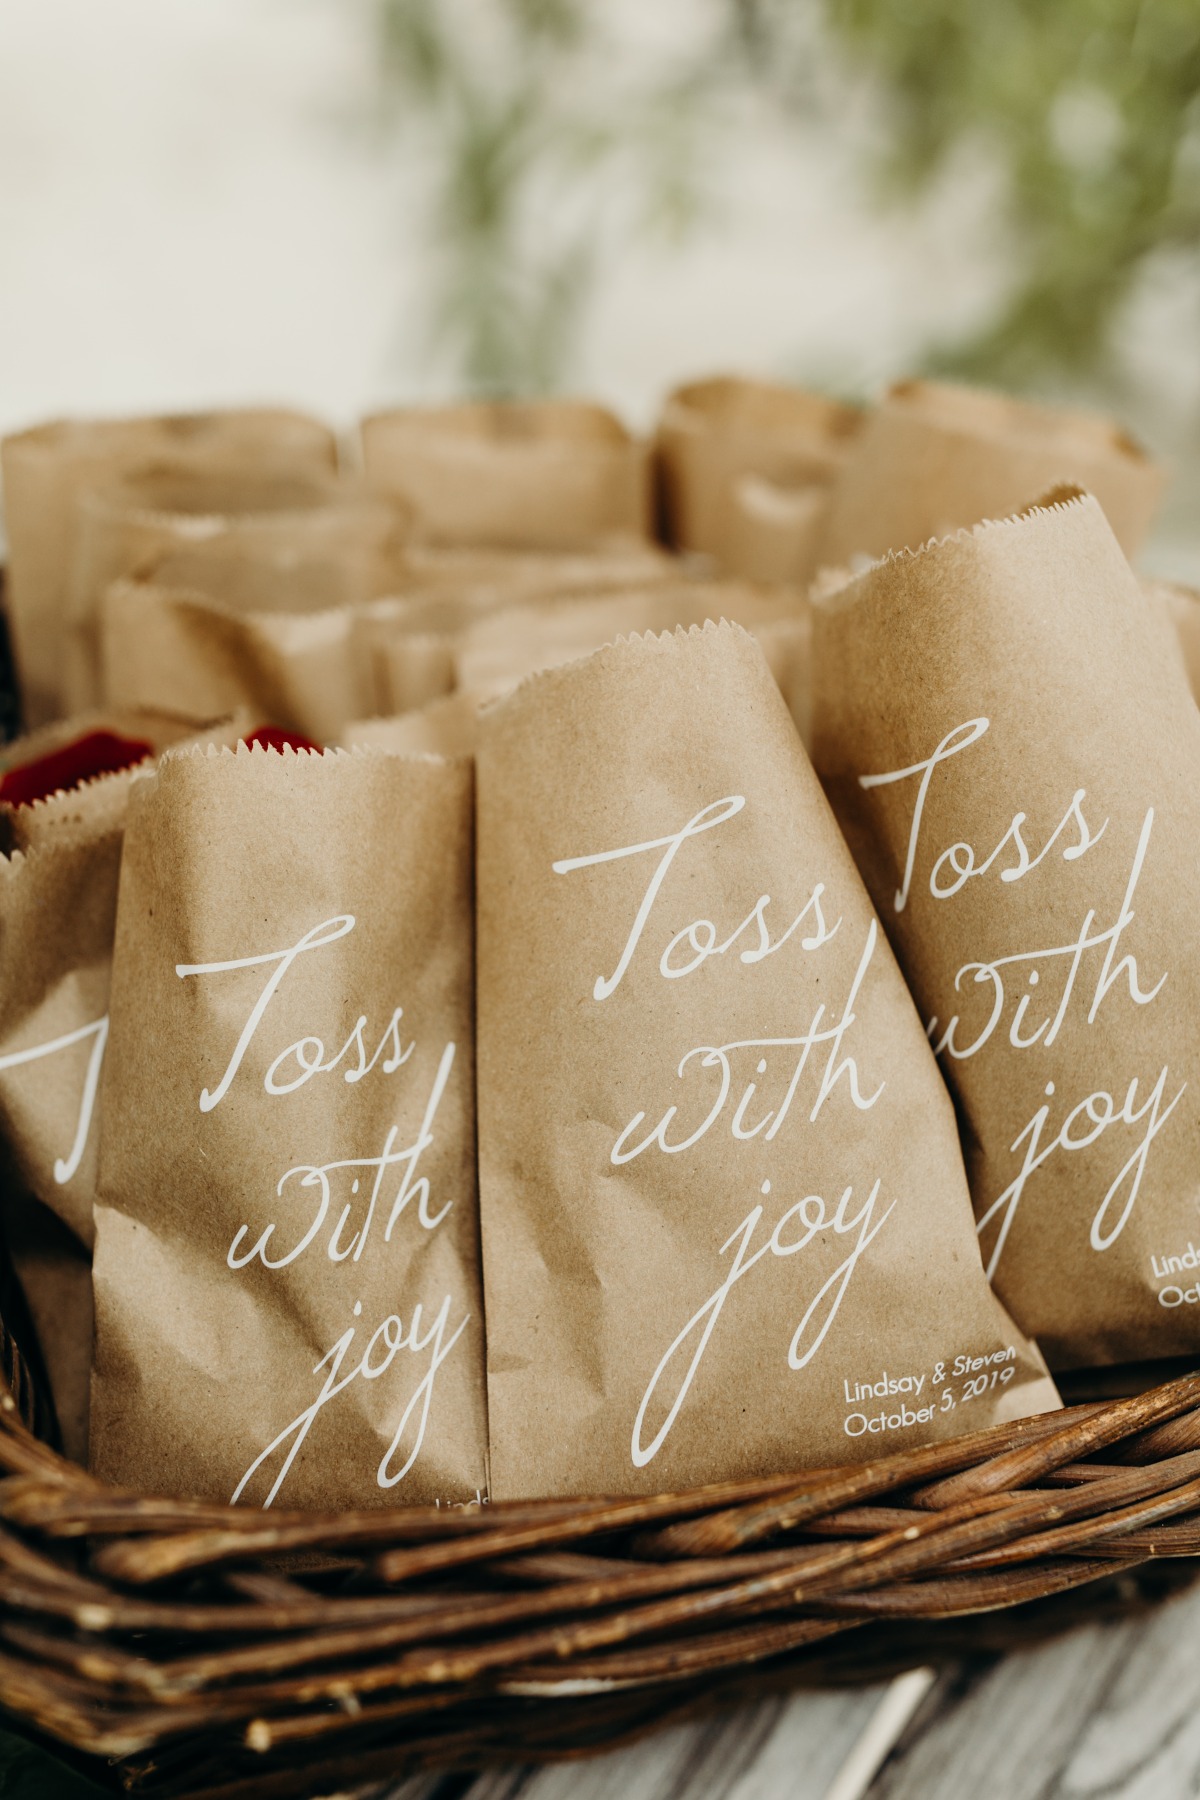 kraft wedding paper bags filled with roses to toss down the aisle